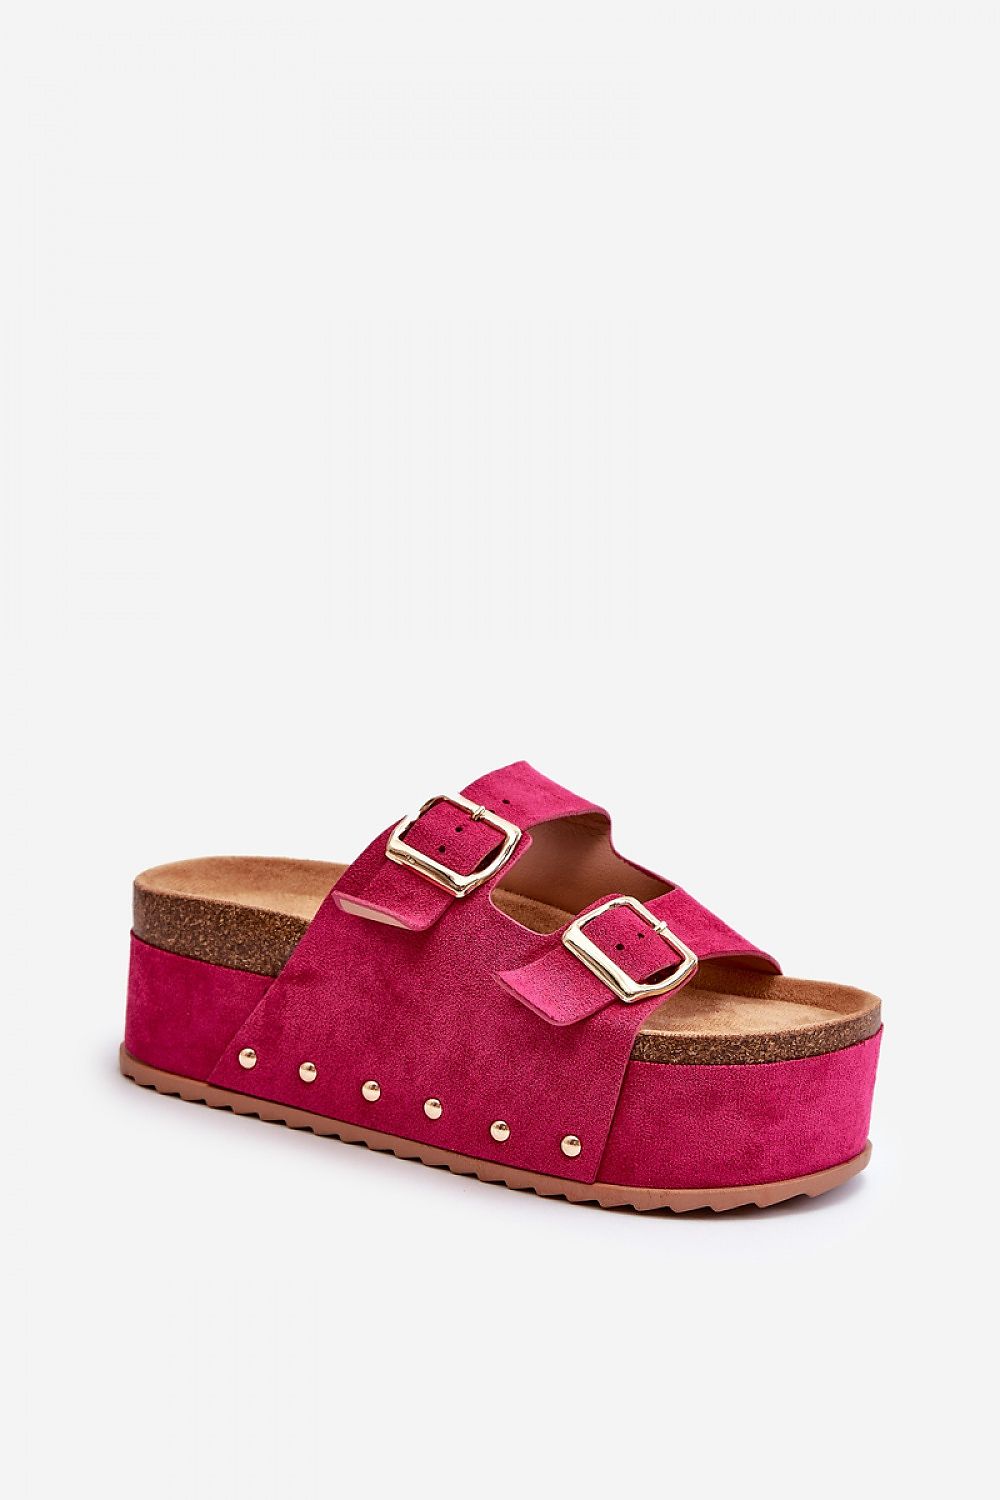 TEEK - Pink Touched Suede Double Band Platform Sandals SHOES TEEK MH 5.5  